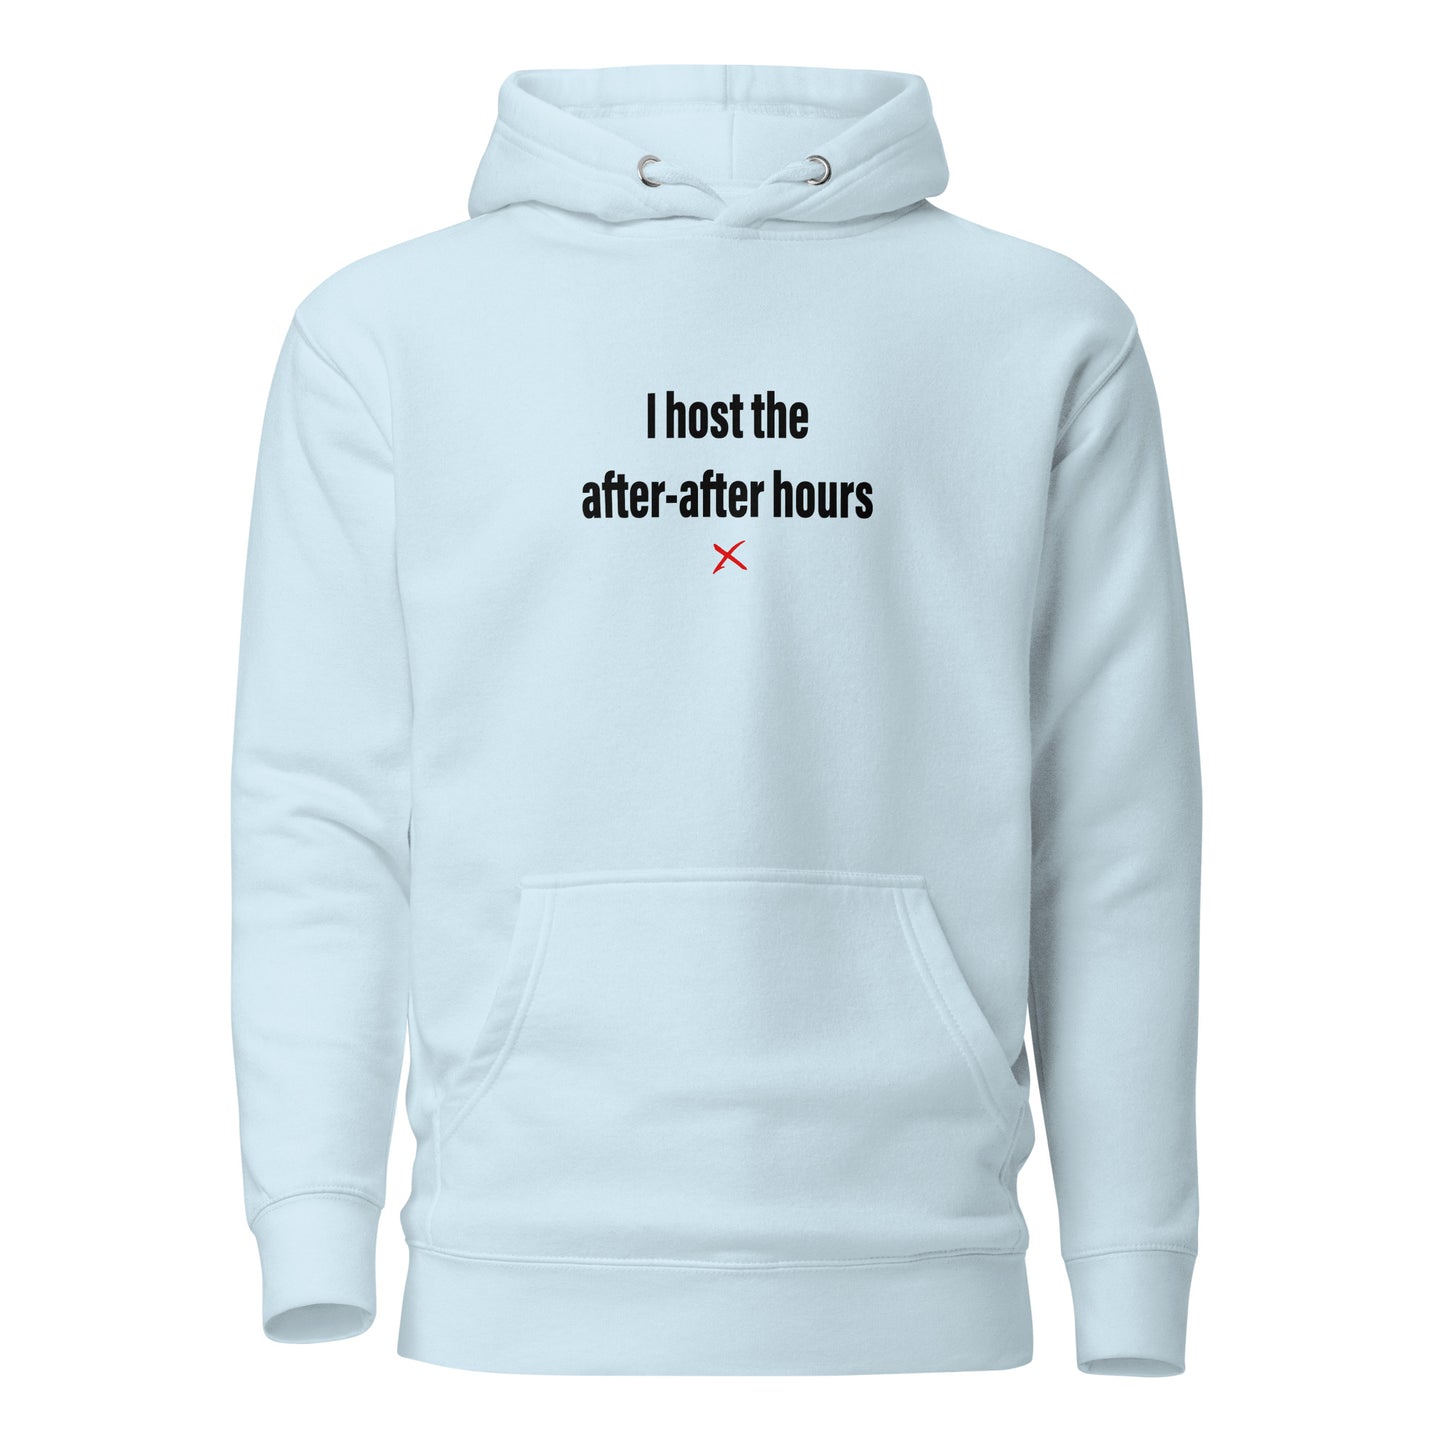 I host the after-after hours - Hoodie